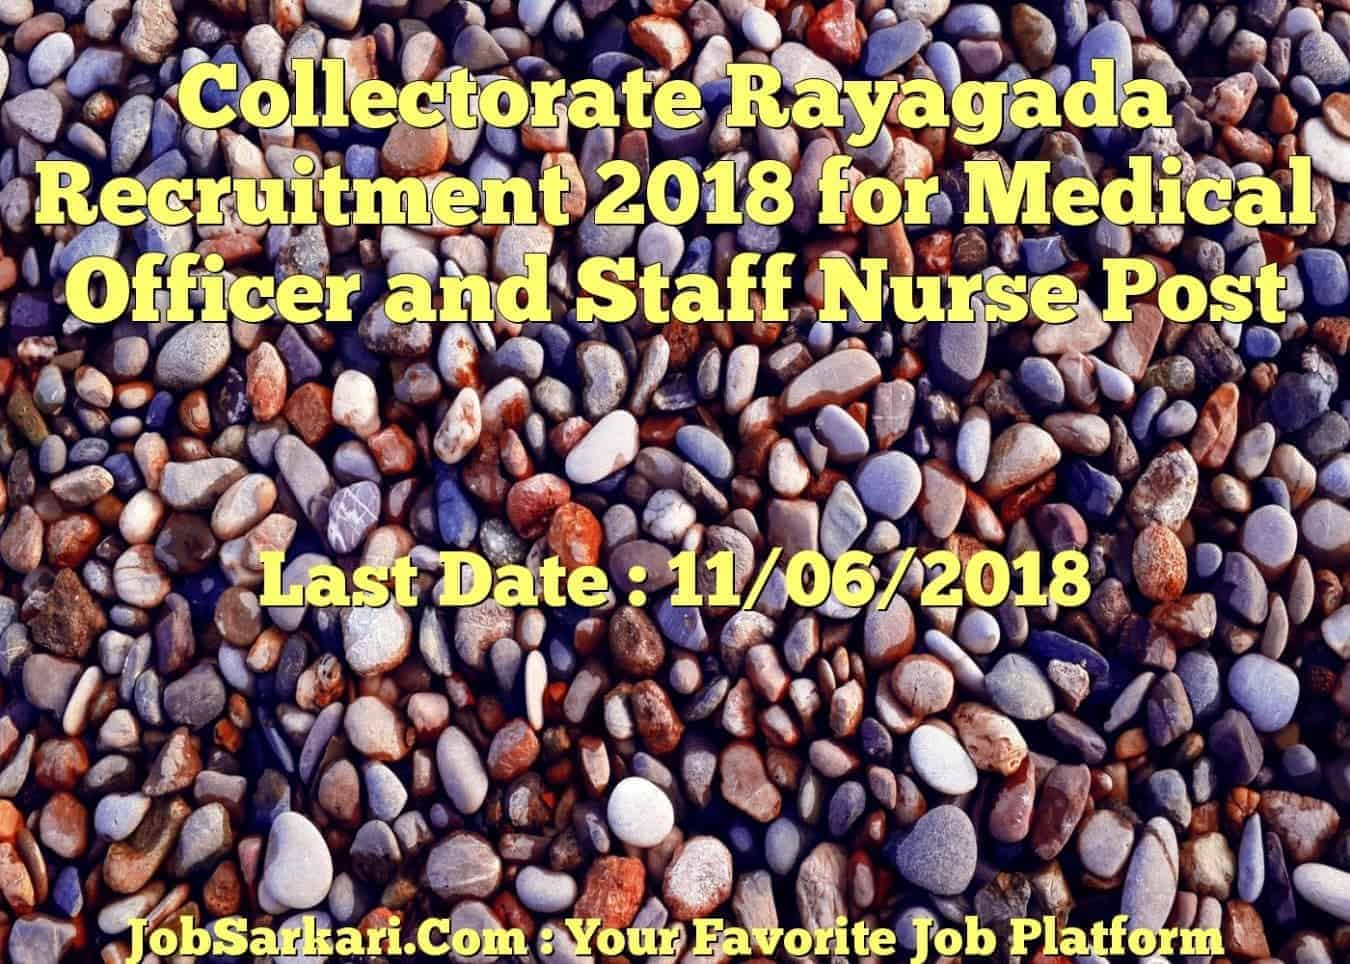 Collectorate Rayagada Recruitment 2018 for Medical Officer and Staff Nurse Post